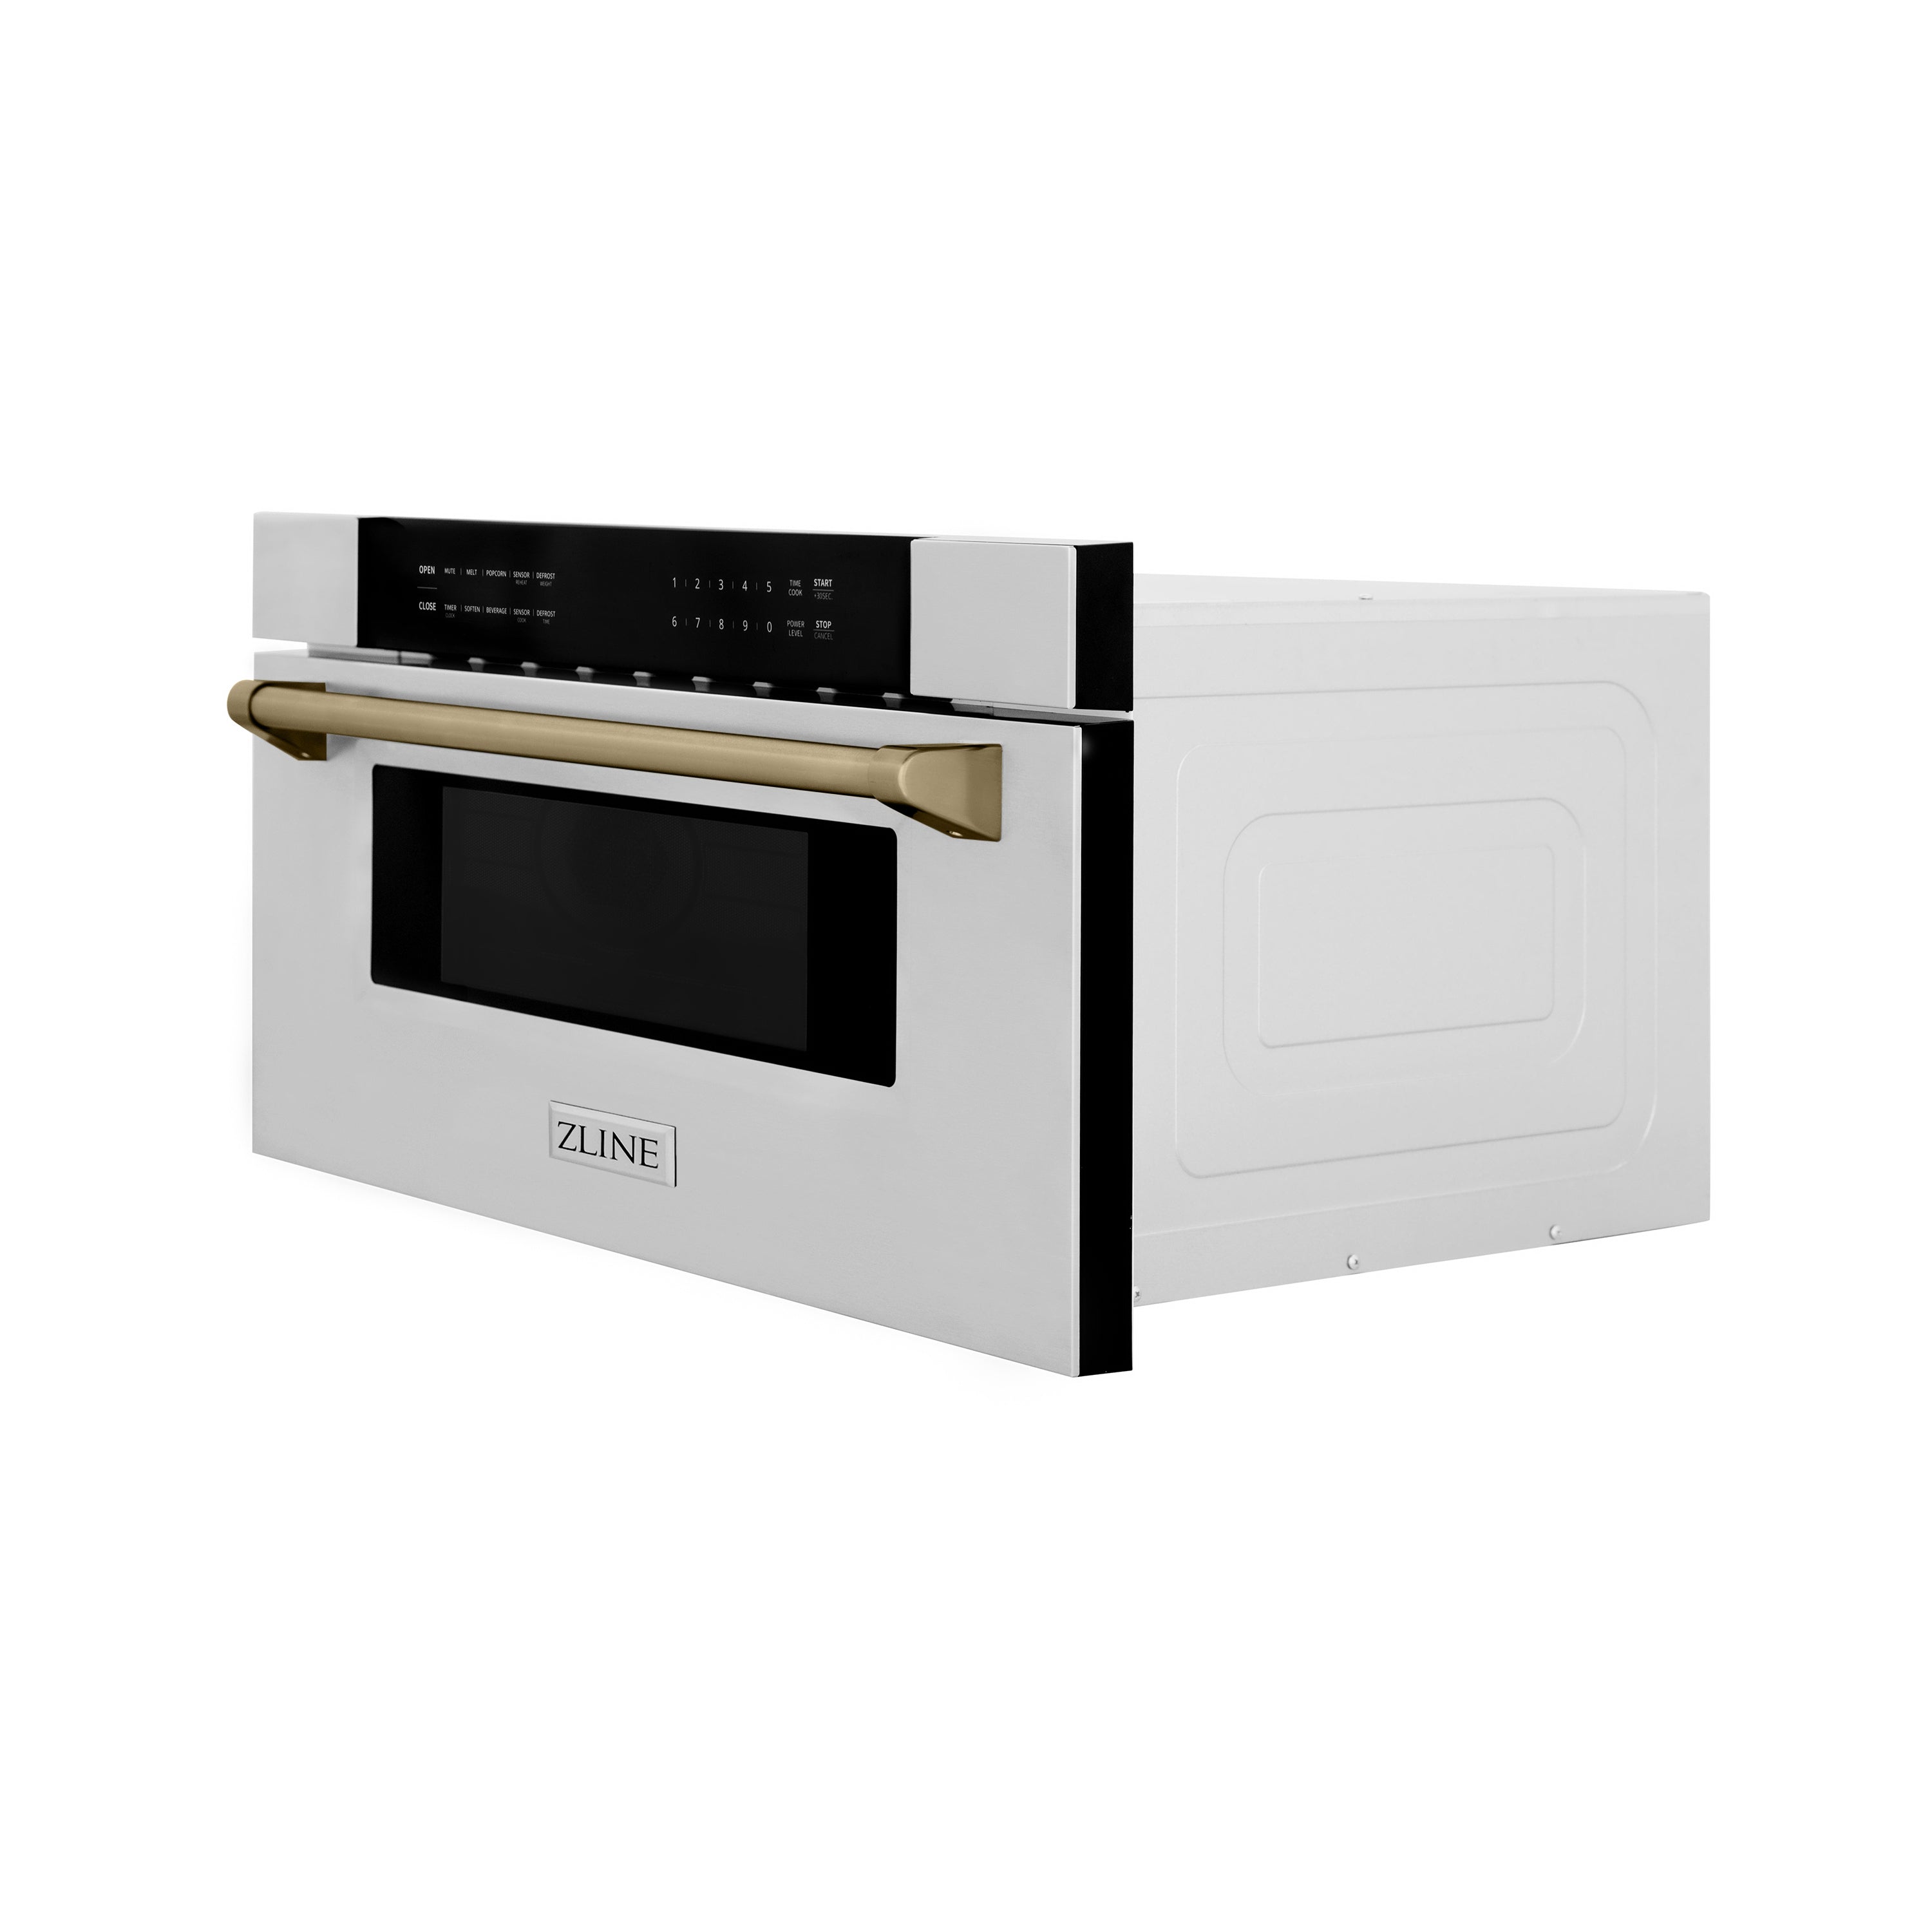 ZLINE Autograph Edition 30 in. 1.2 cu. ft. Built-In Microwave Drawer in Stainless Steel with Champagne Bronze Accents (MWDZ-30-CB) Side View Drawer Closed